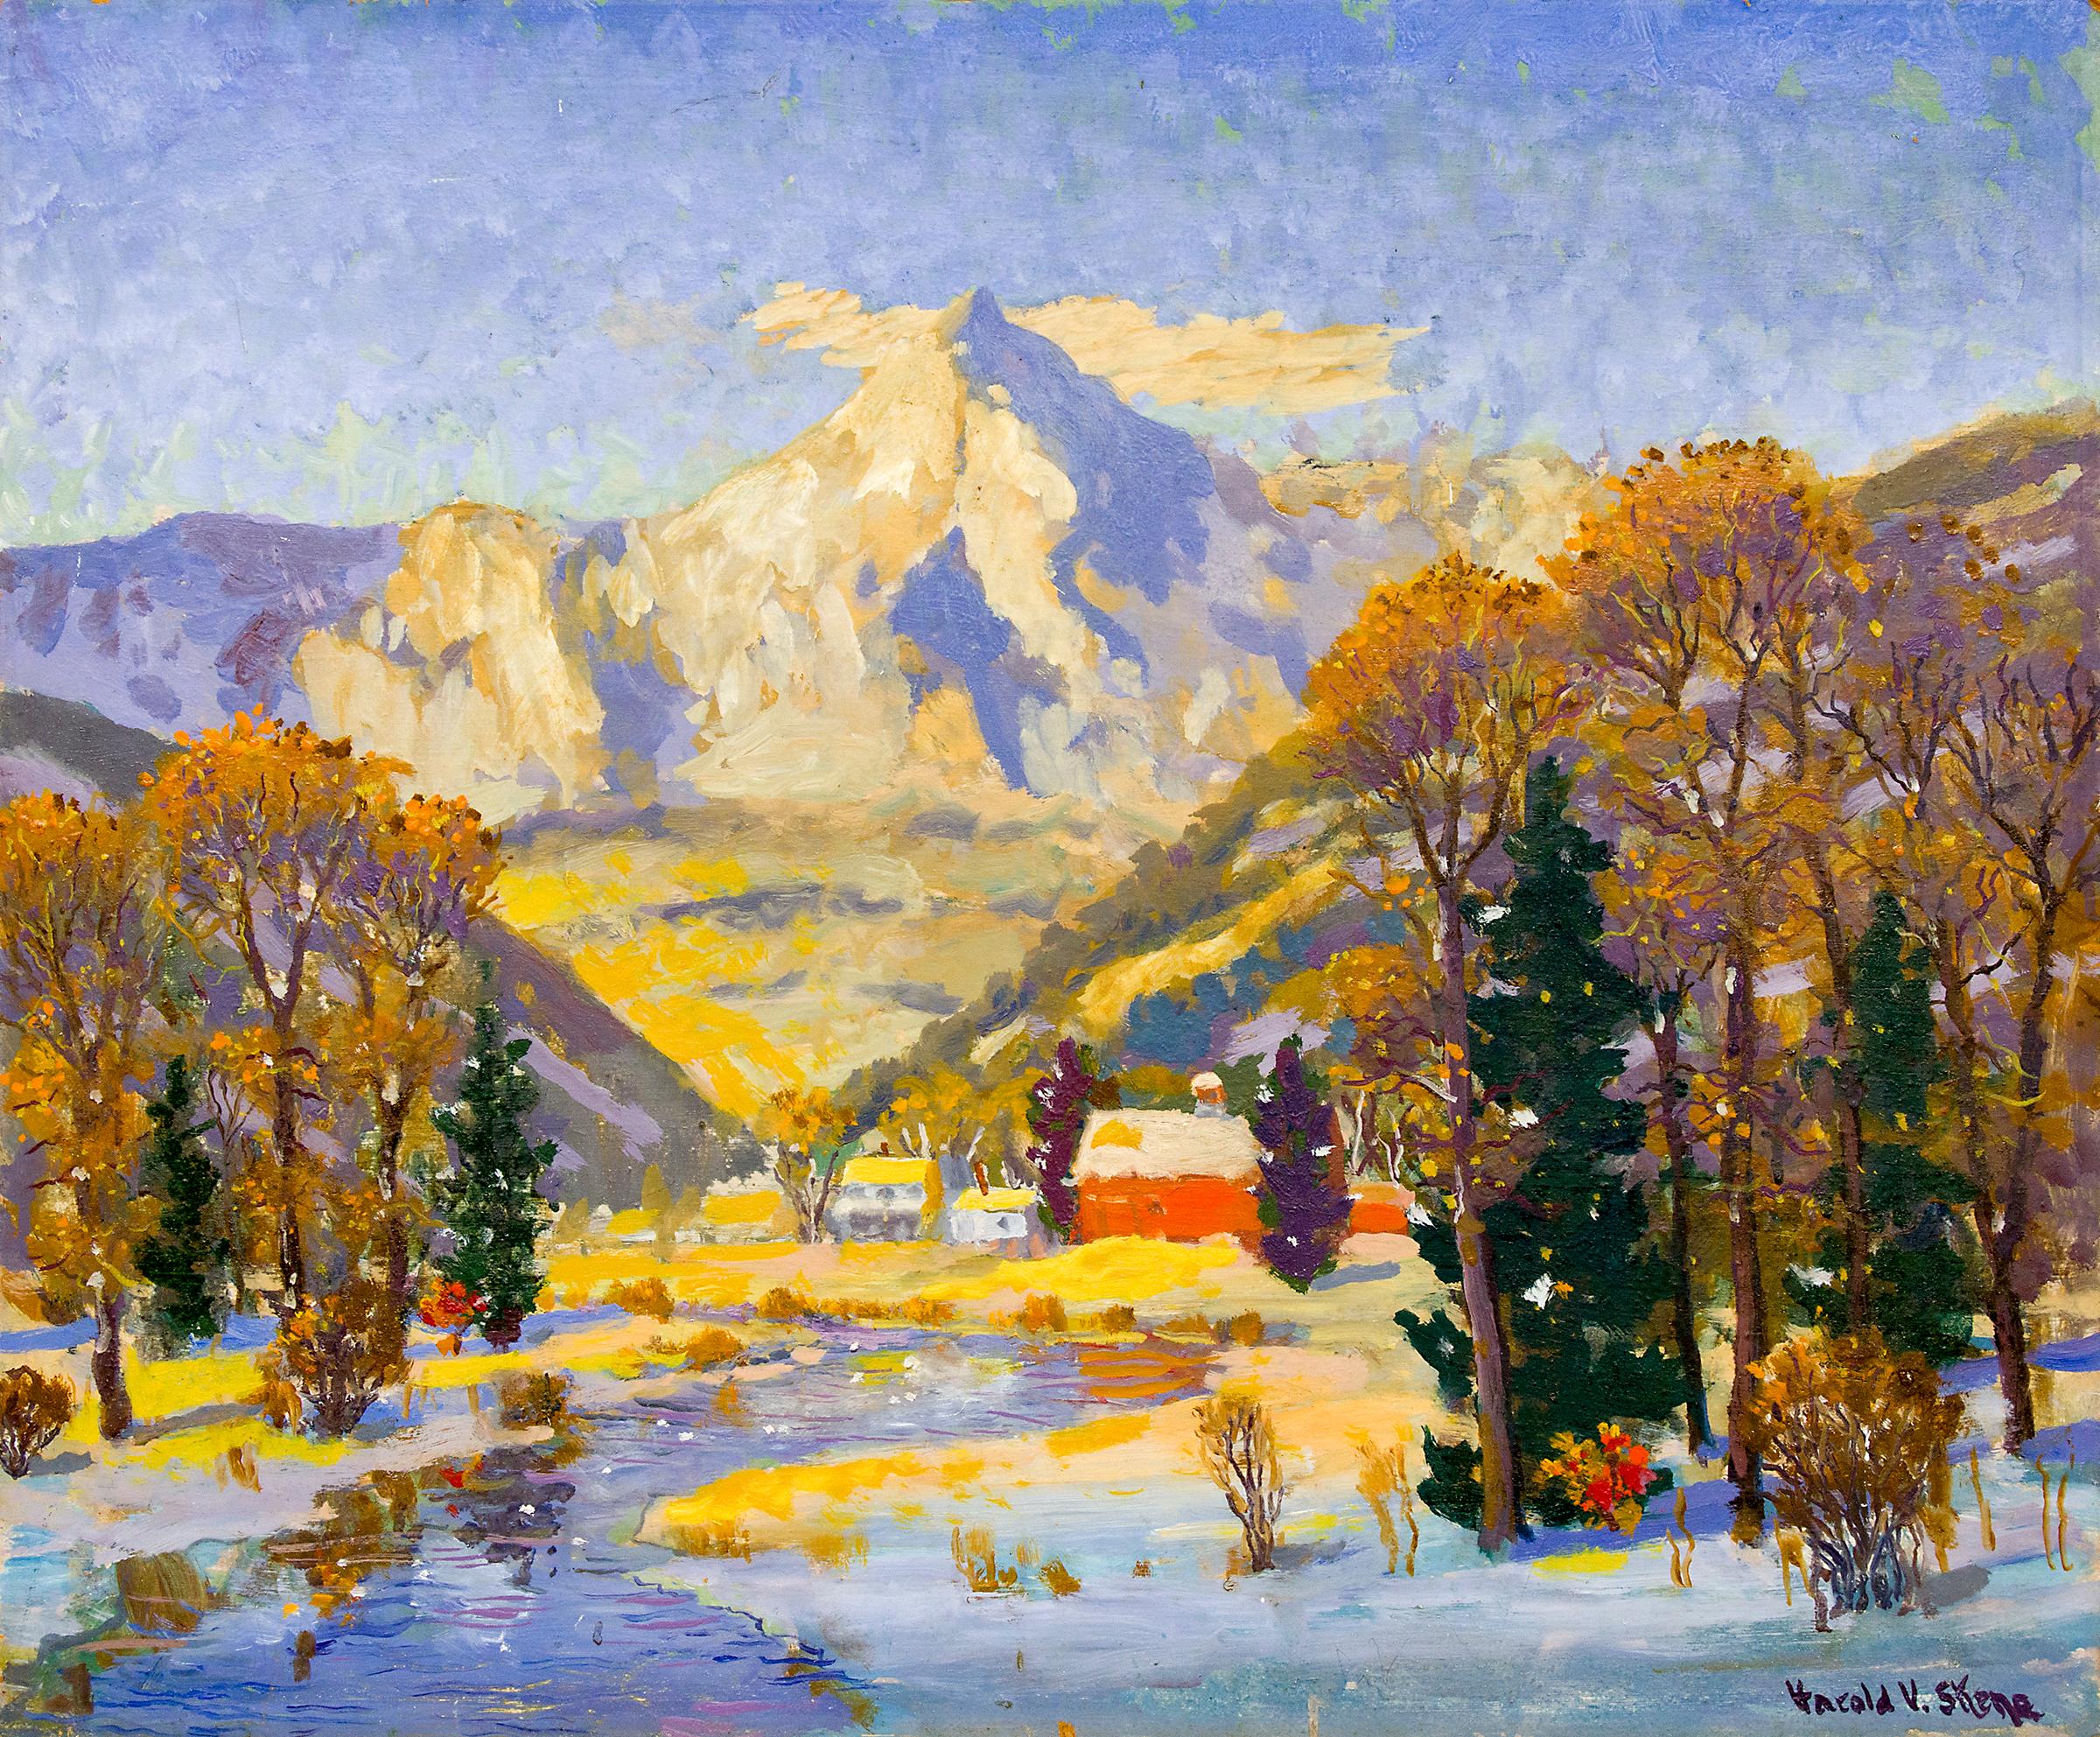 Colorado Winter (Snowy Mountain Landscape with a Creek and Ranch House & Barn) - Painting by Harold Vincent Skene